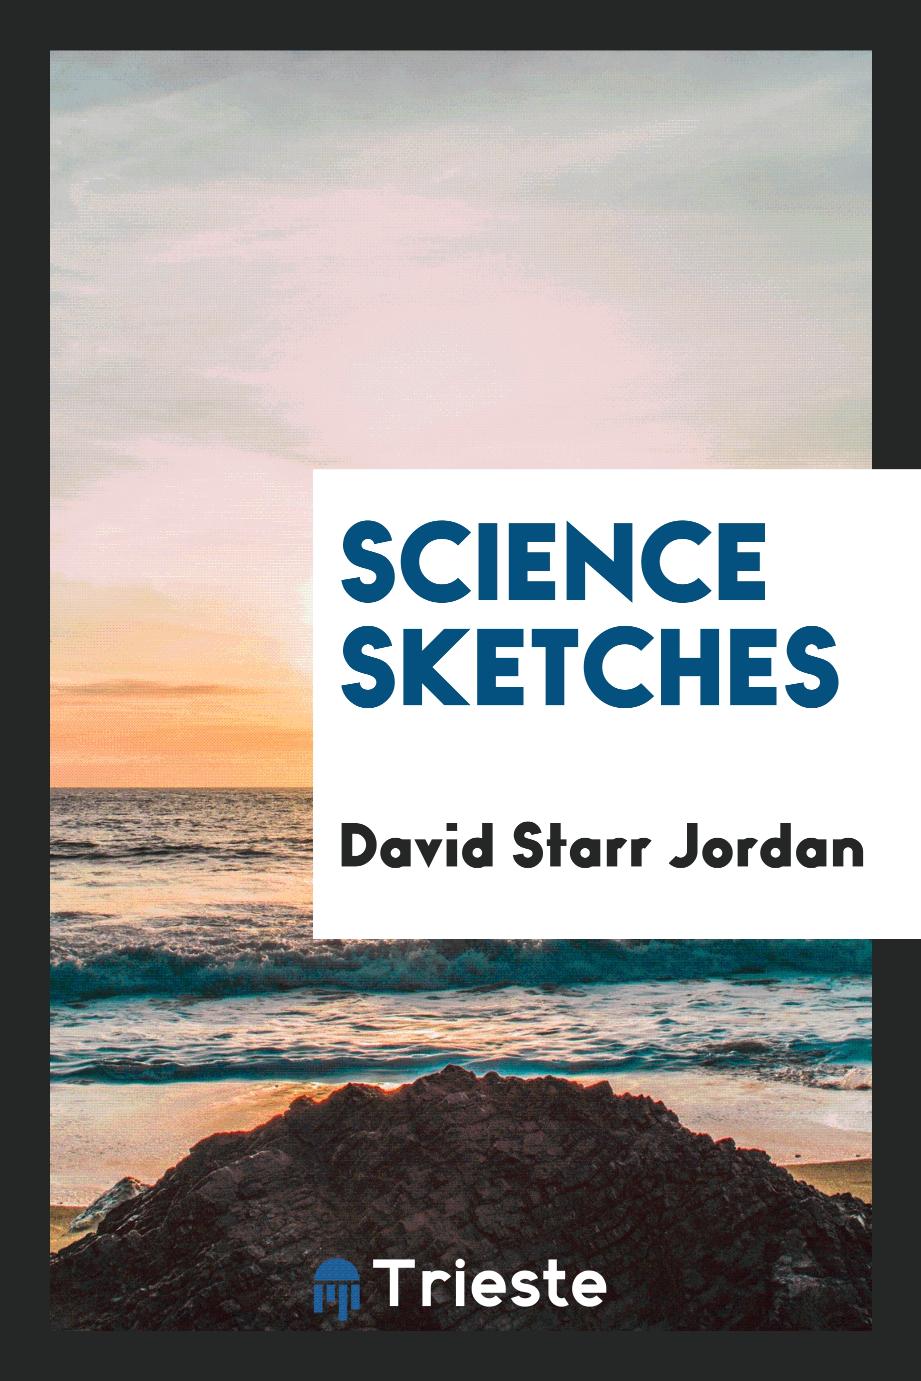 Science sketches